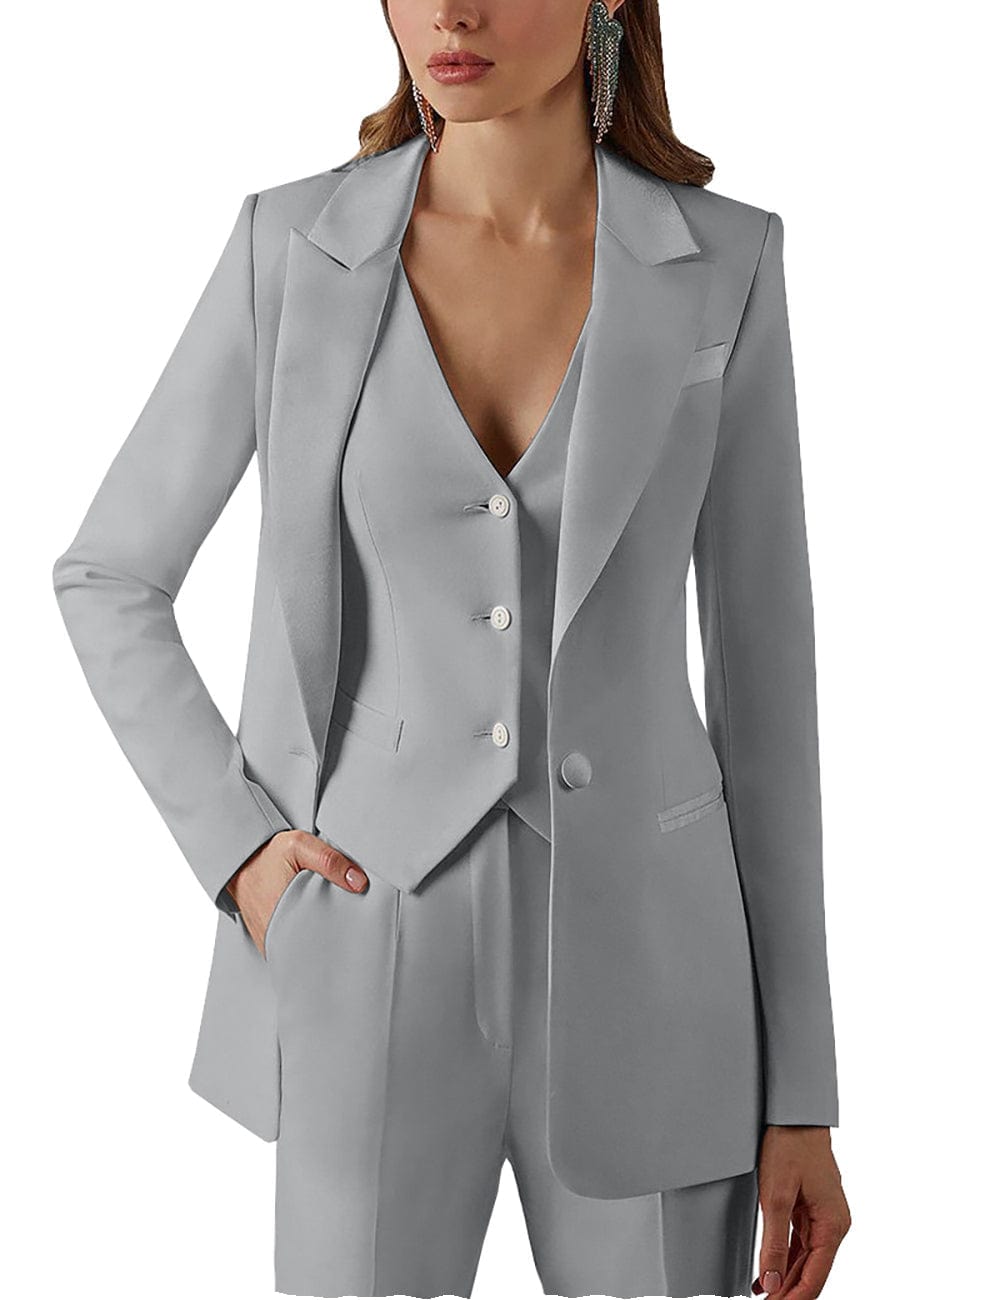 Buy Qiii ; Beautiful You Women's Single Breasted Formal Summer Blazer  Without Lining Navy Blue at Amazon.in